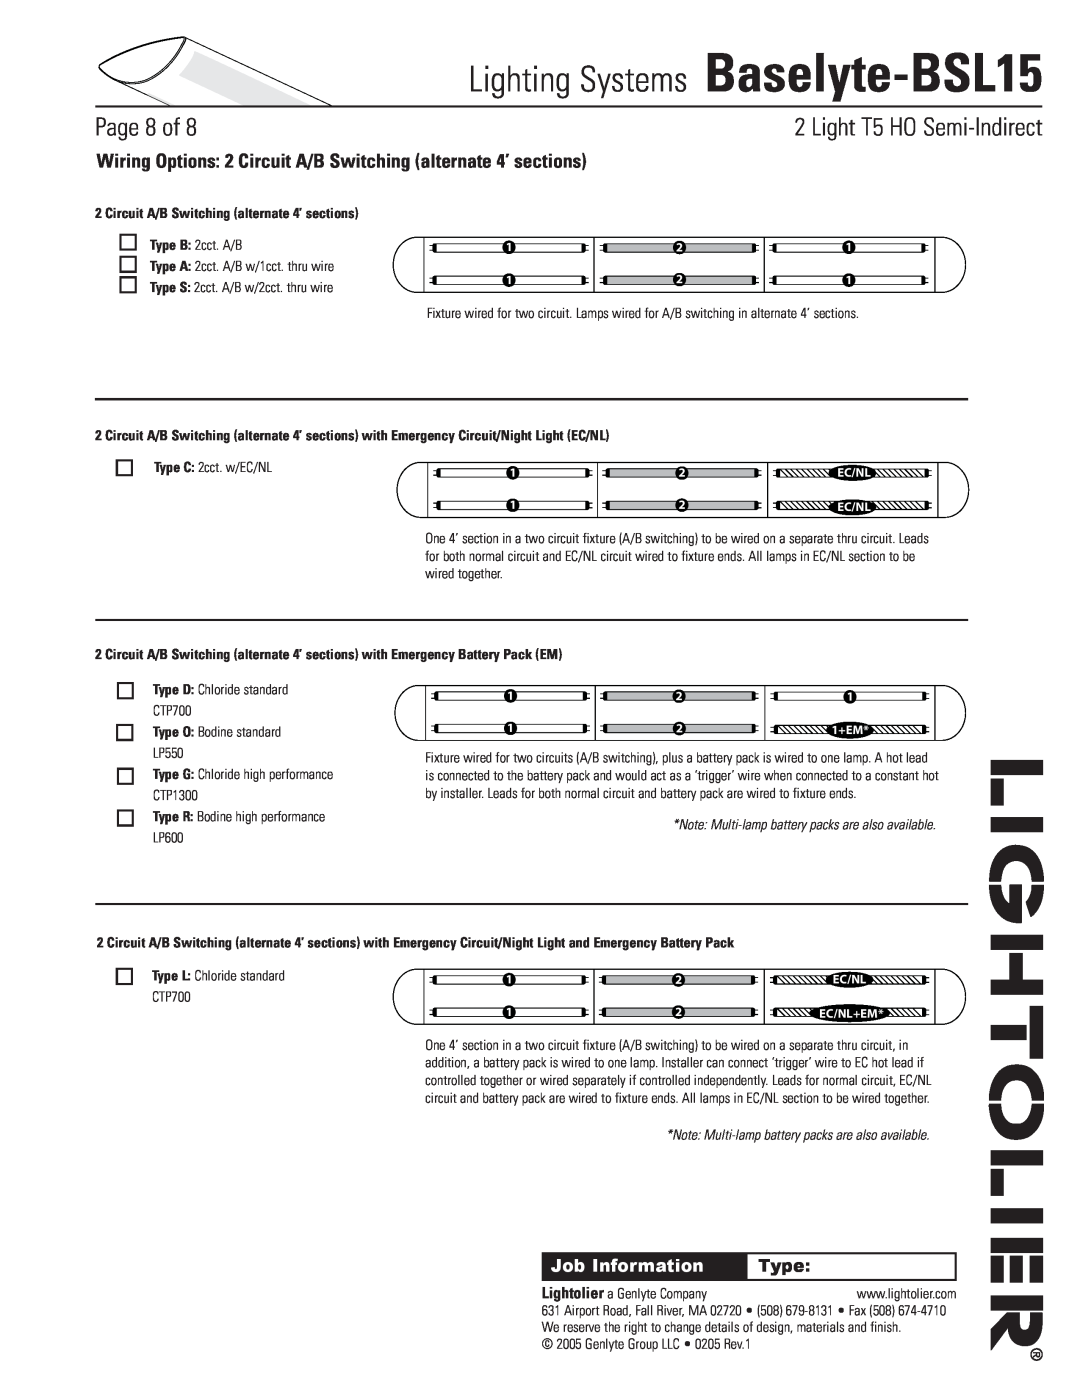 Lightolier Baselyte-BSL15 specifications Circuit A/B Switching alternate 4’ sections, Type O Bodine standard LP550, Page of 